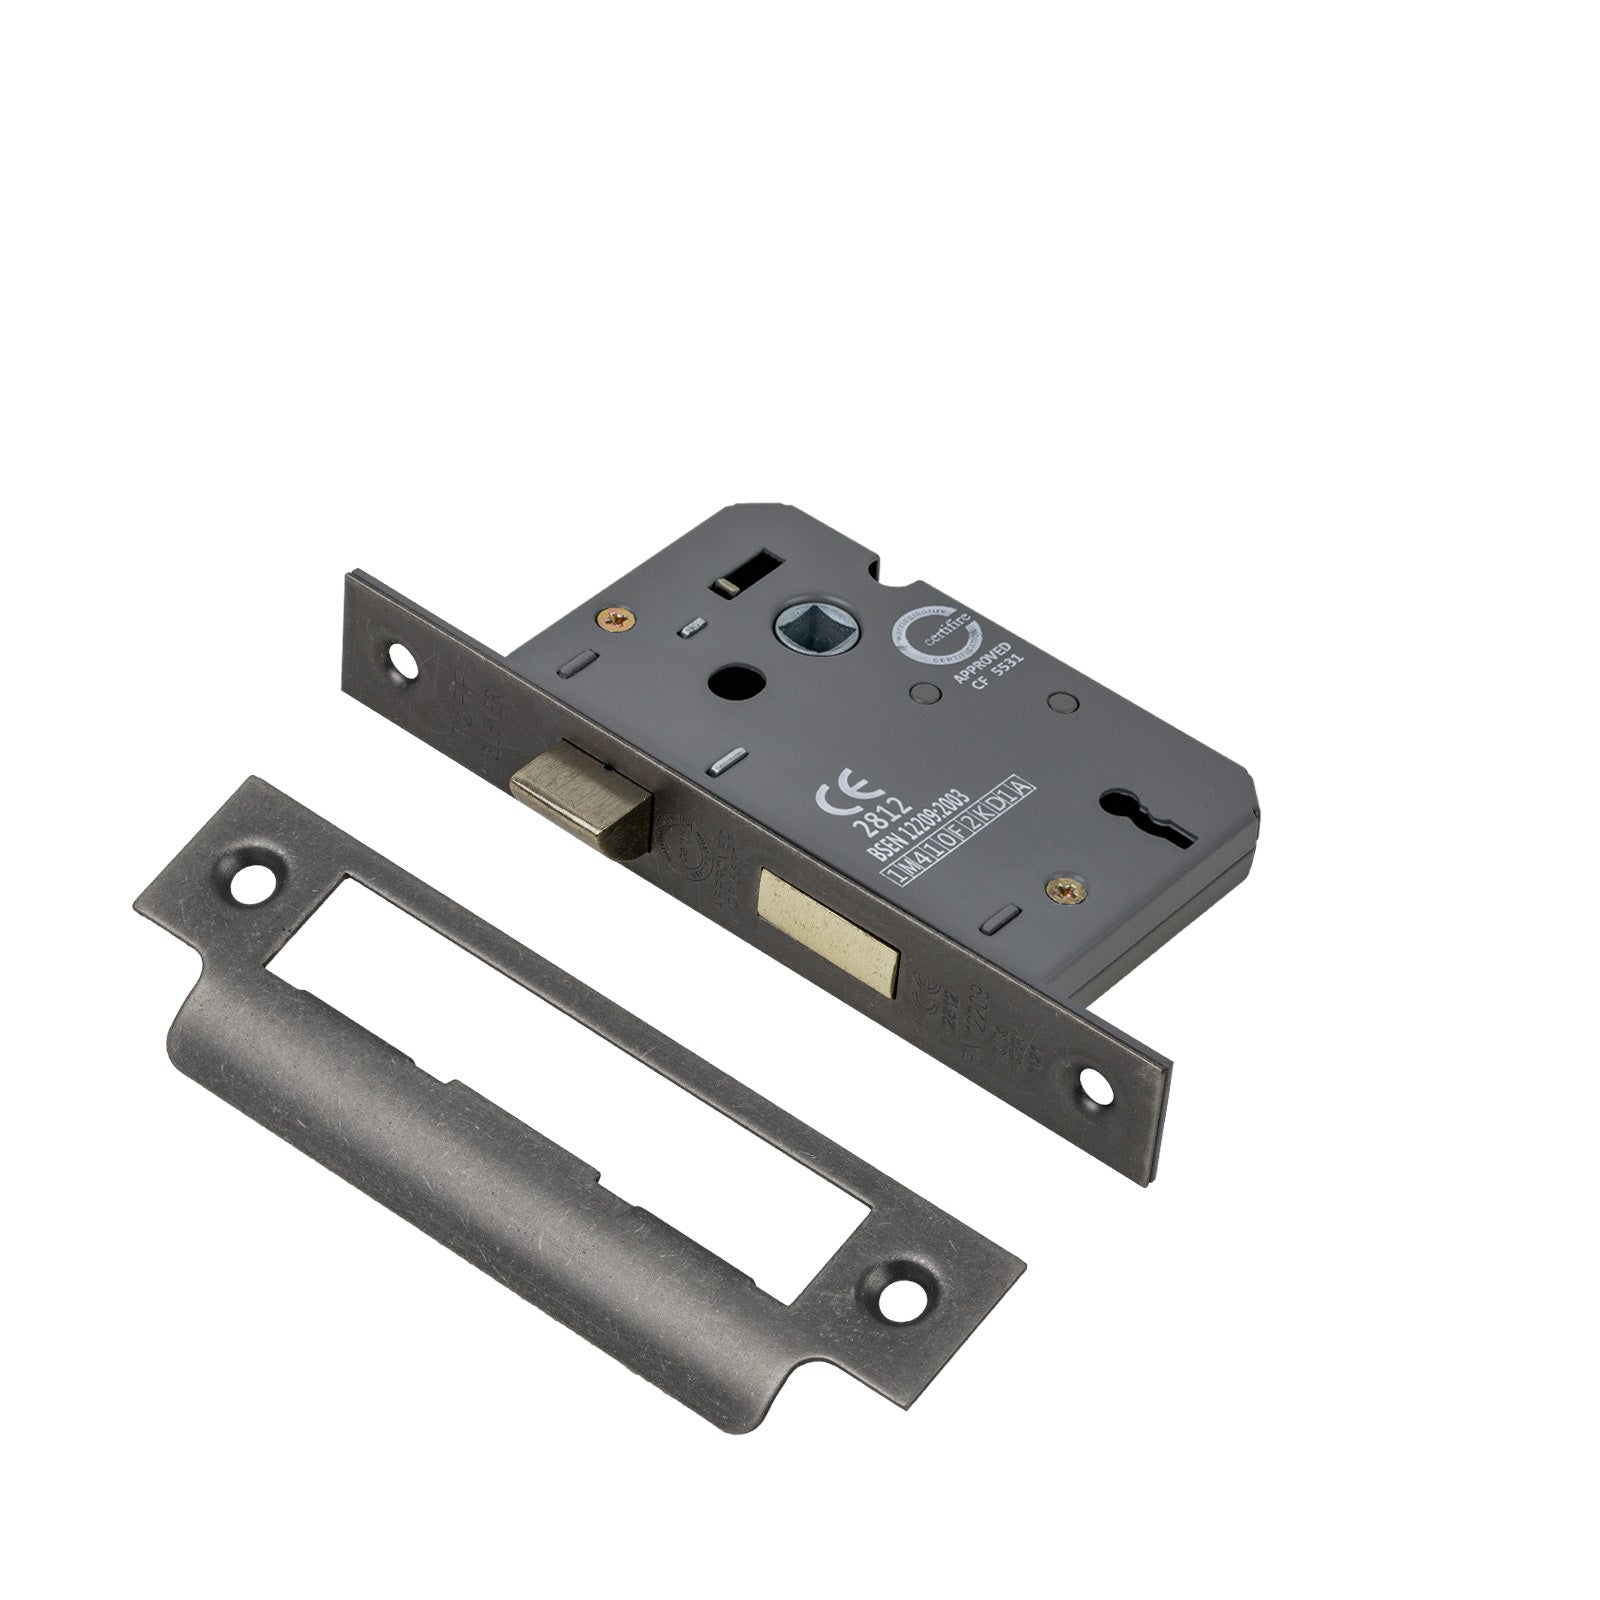 SHOW 3 Lever Sash Lock - 2.5 Inch with Distressed Silver finished forend and striker plate